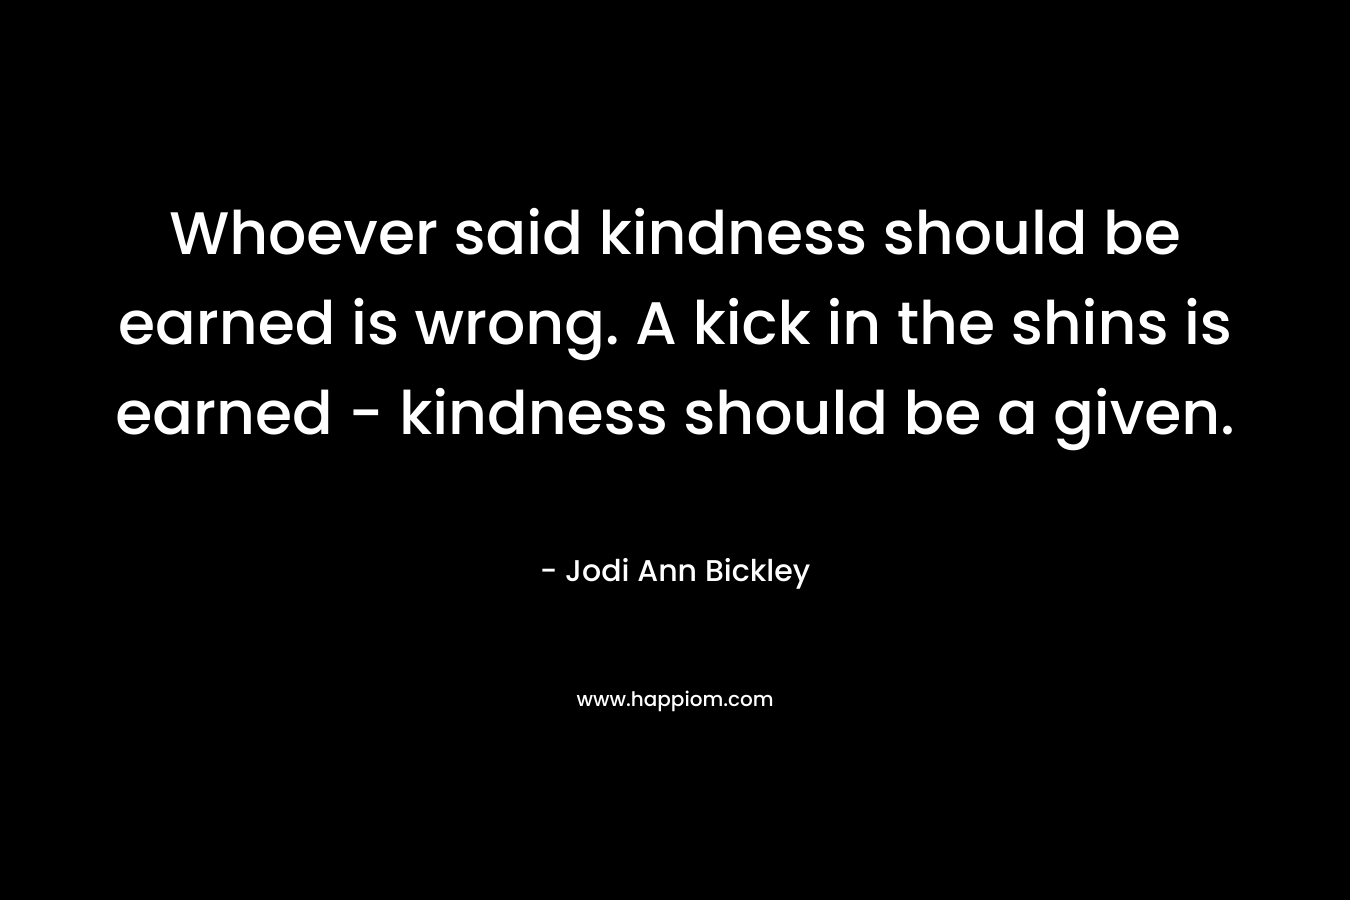 Whoever said kindness should be earned is wrong. A kick in the shins is earned - kindness should be a given.